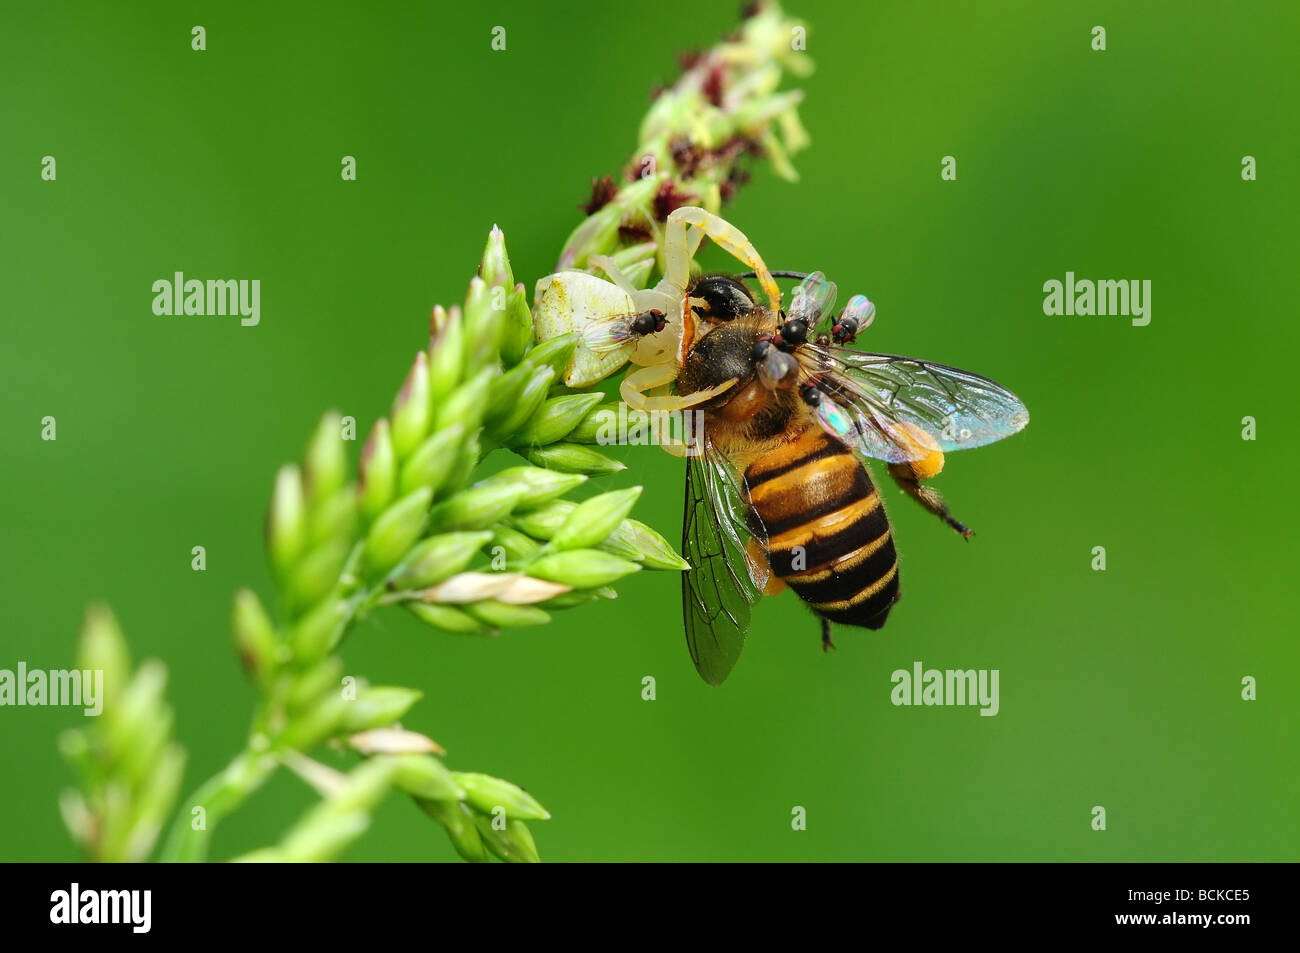 crab spider eating a bee in the parks Stock Photo